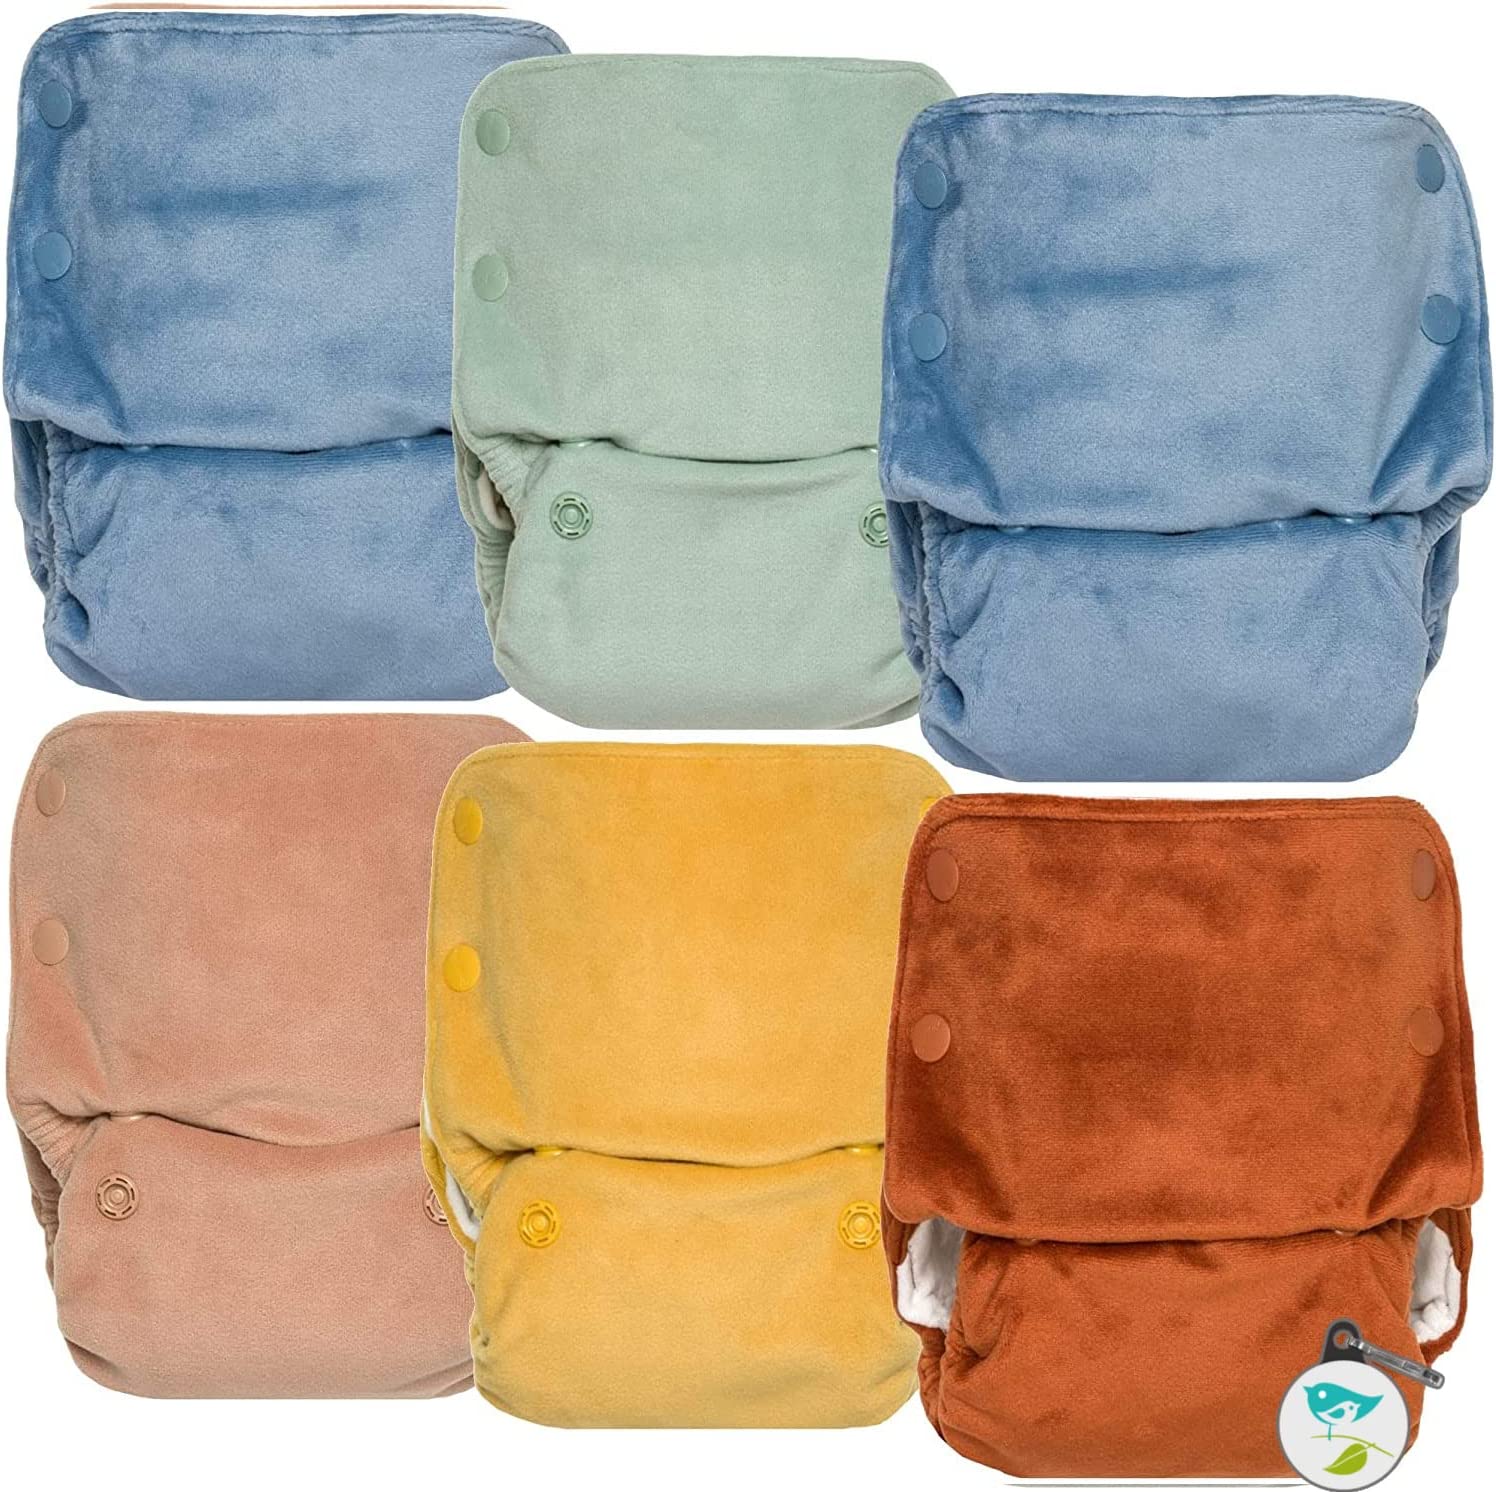 GroVia Buttah Organic All in One Snap Baby Cloth Diaper (AIO) – 6 Pack (Color Mix 3)